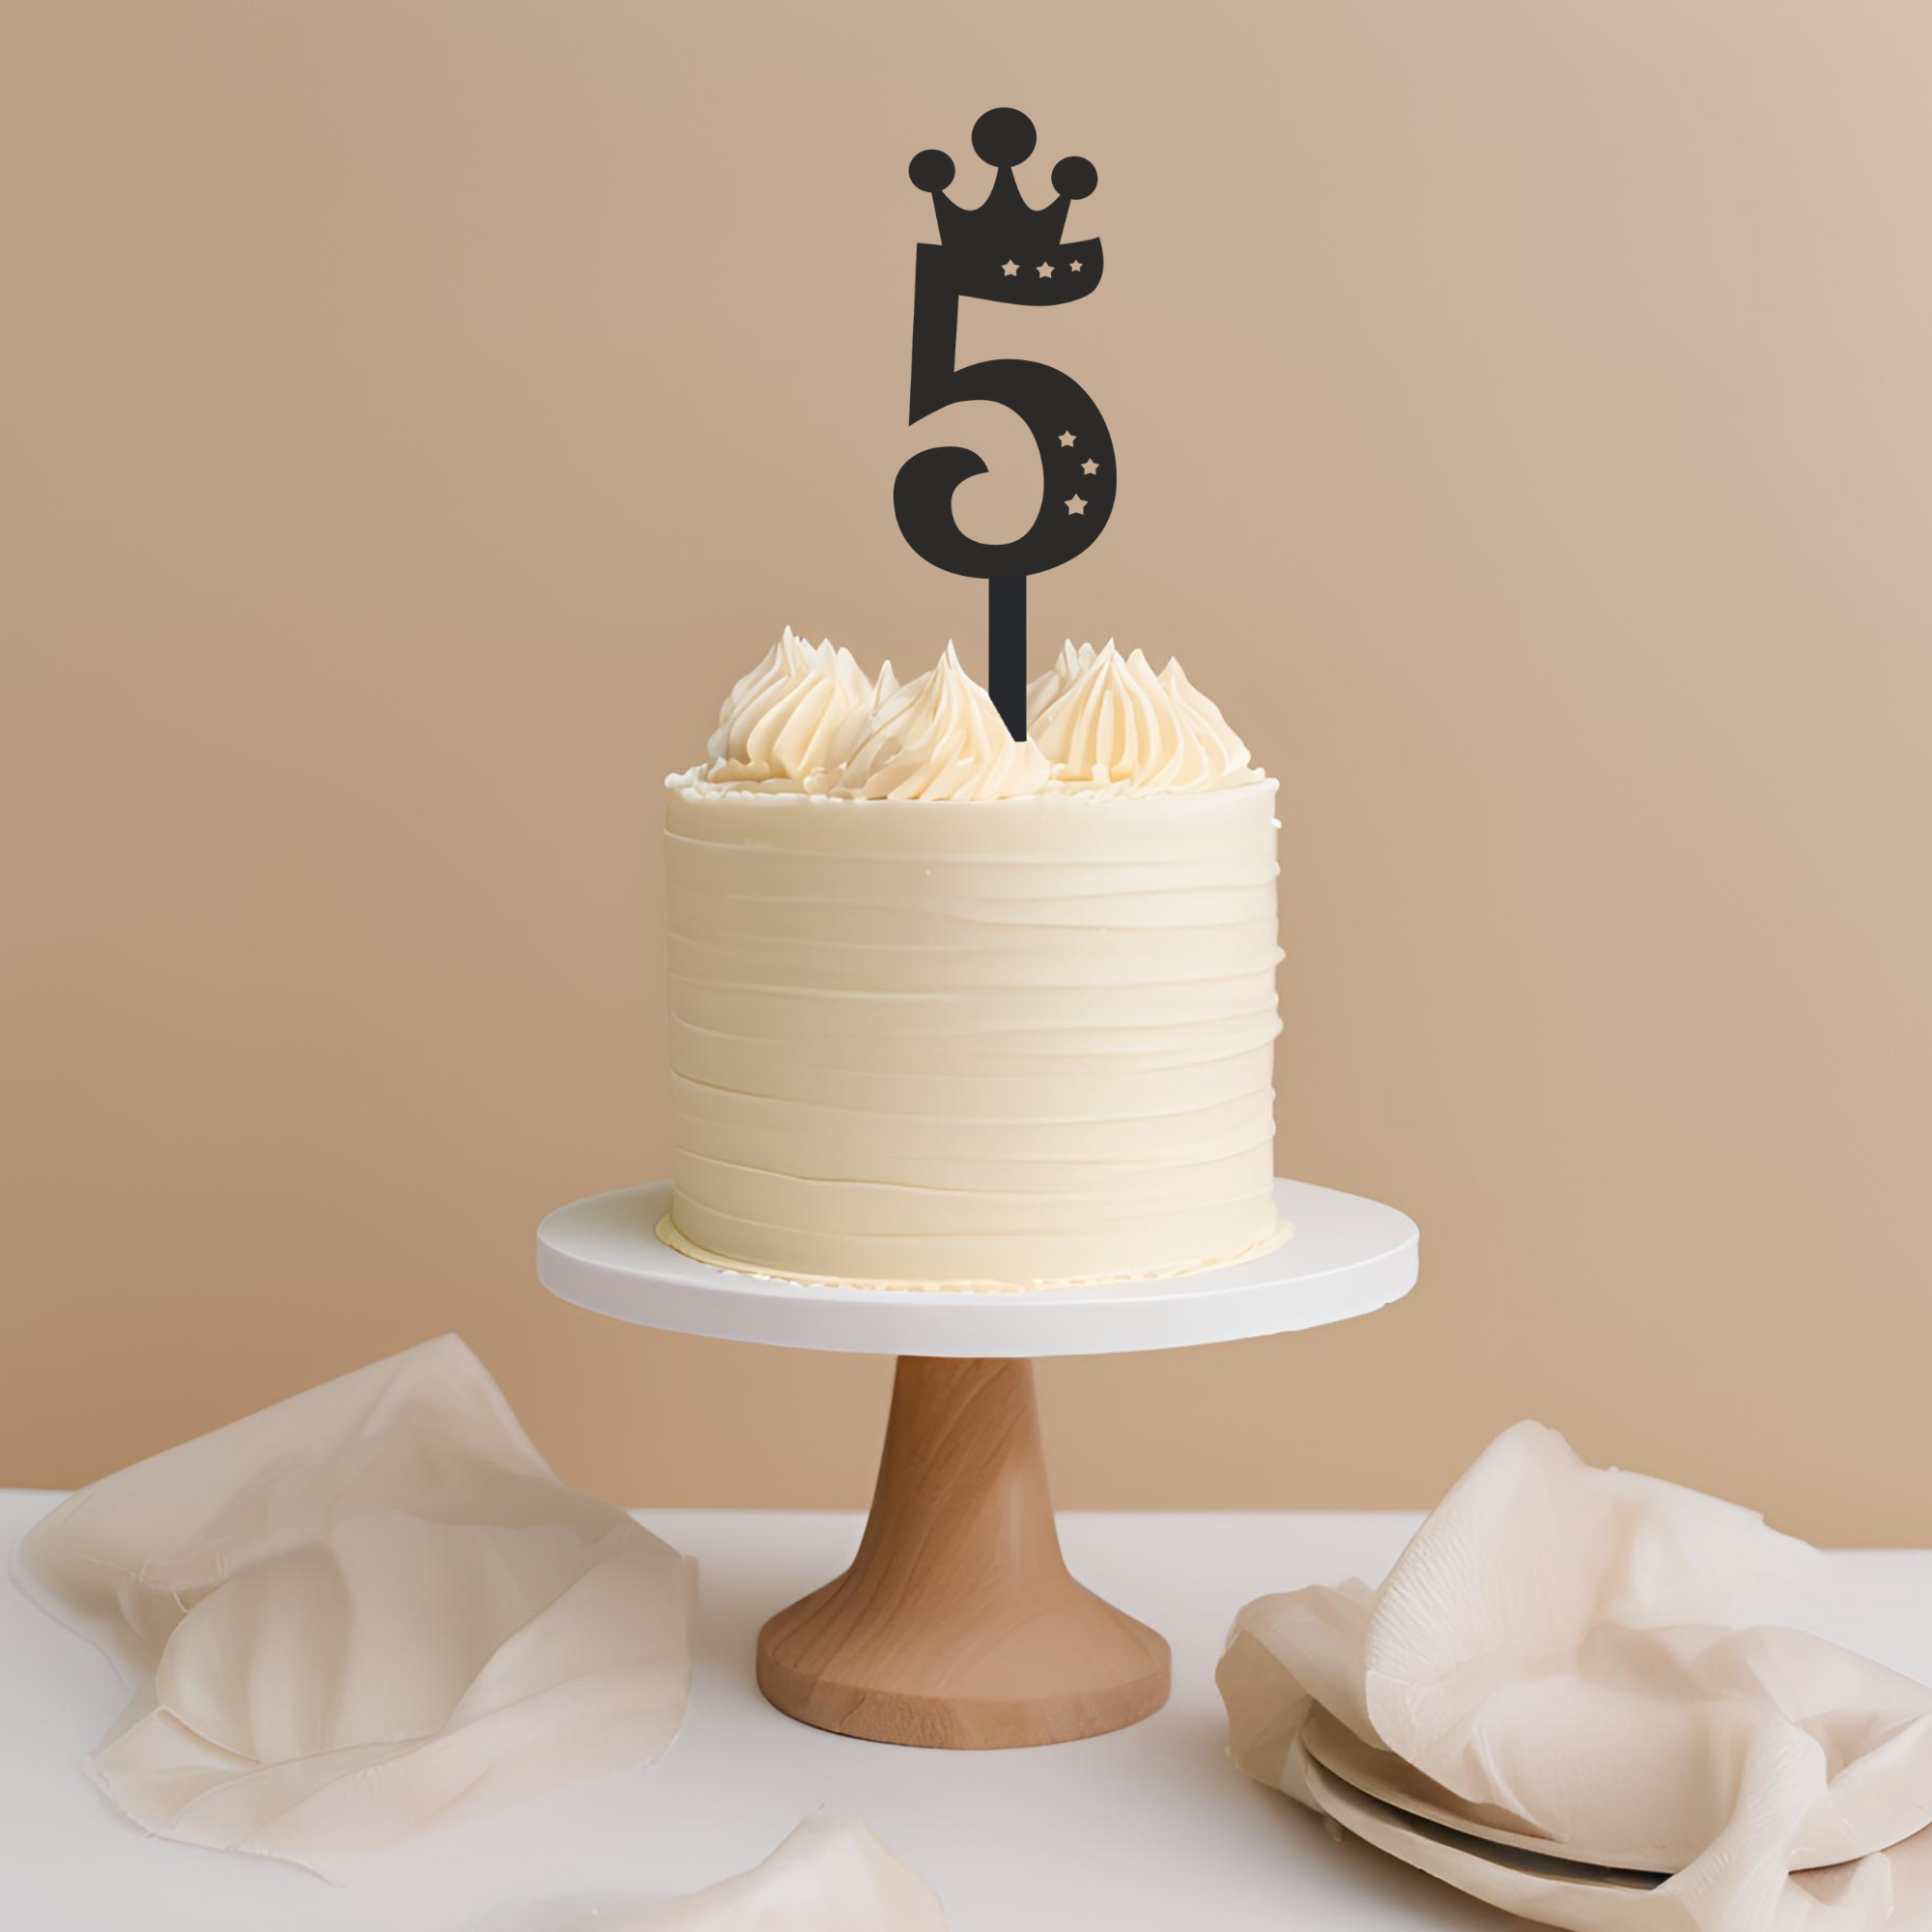 Age 5 Crown Cake Topper